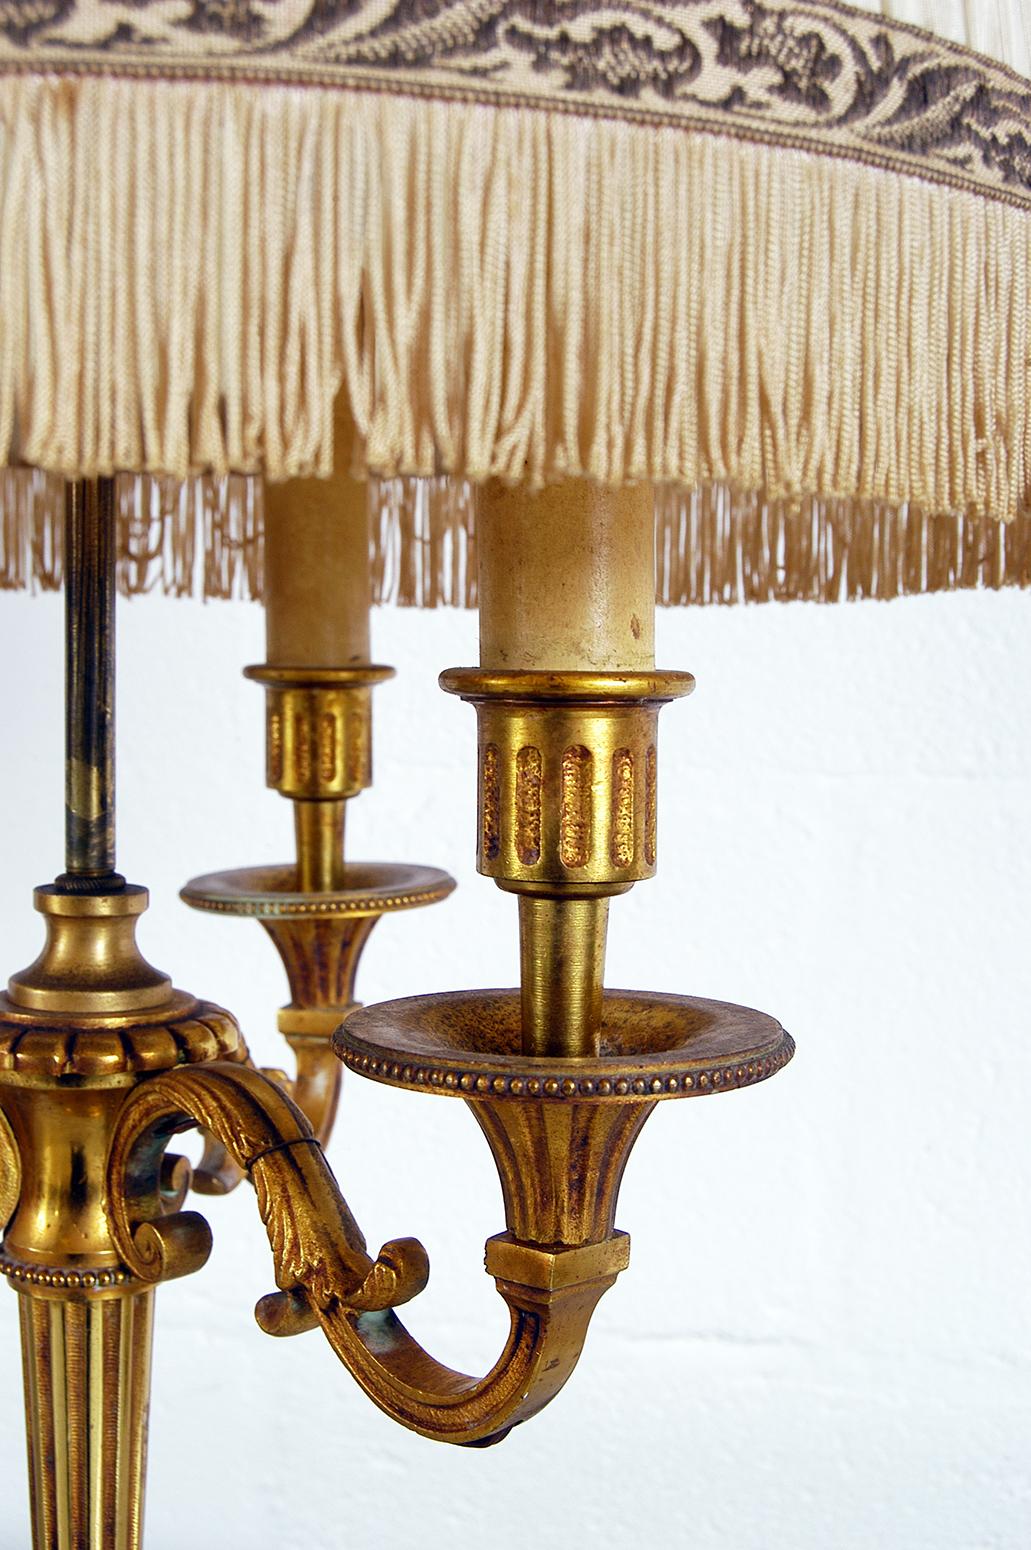 Empire Mid-20th Century French Gilt Brass Bouillotte Table Lamp